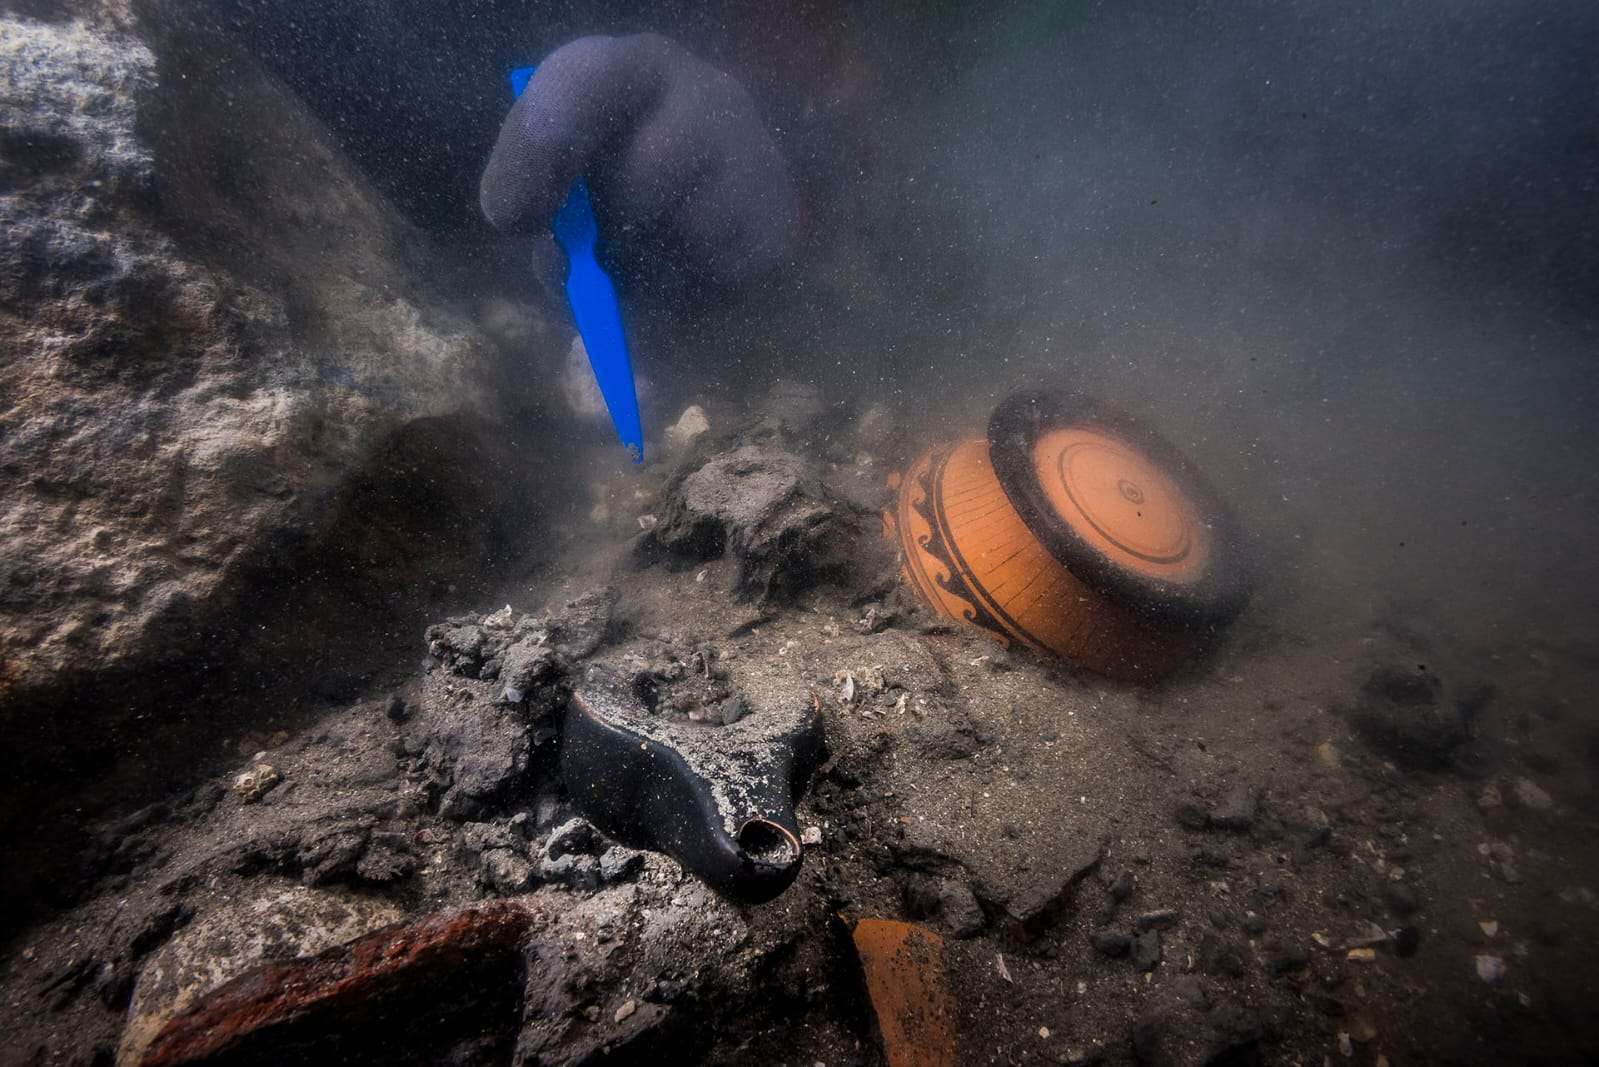 Wreck of Warship from Ptolemaic Period Discovered in Alexandria